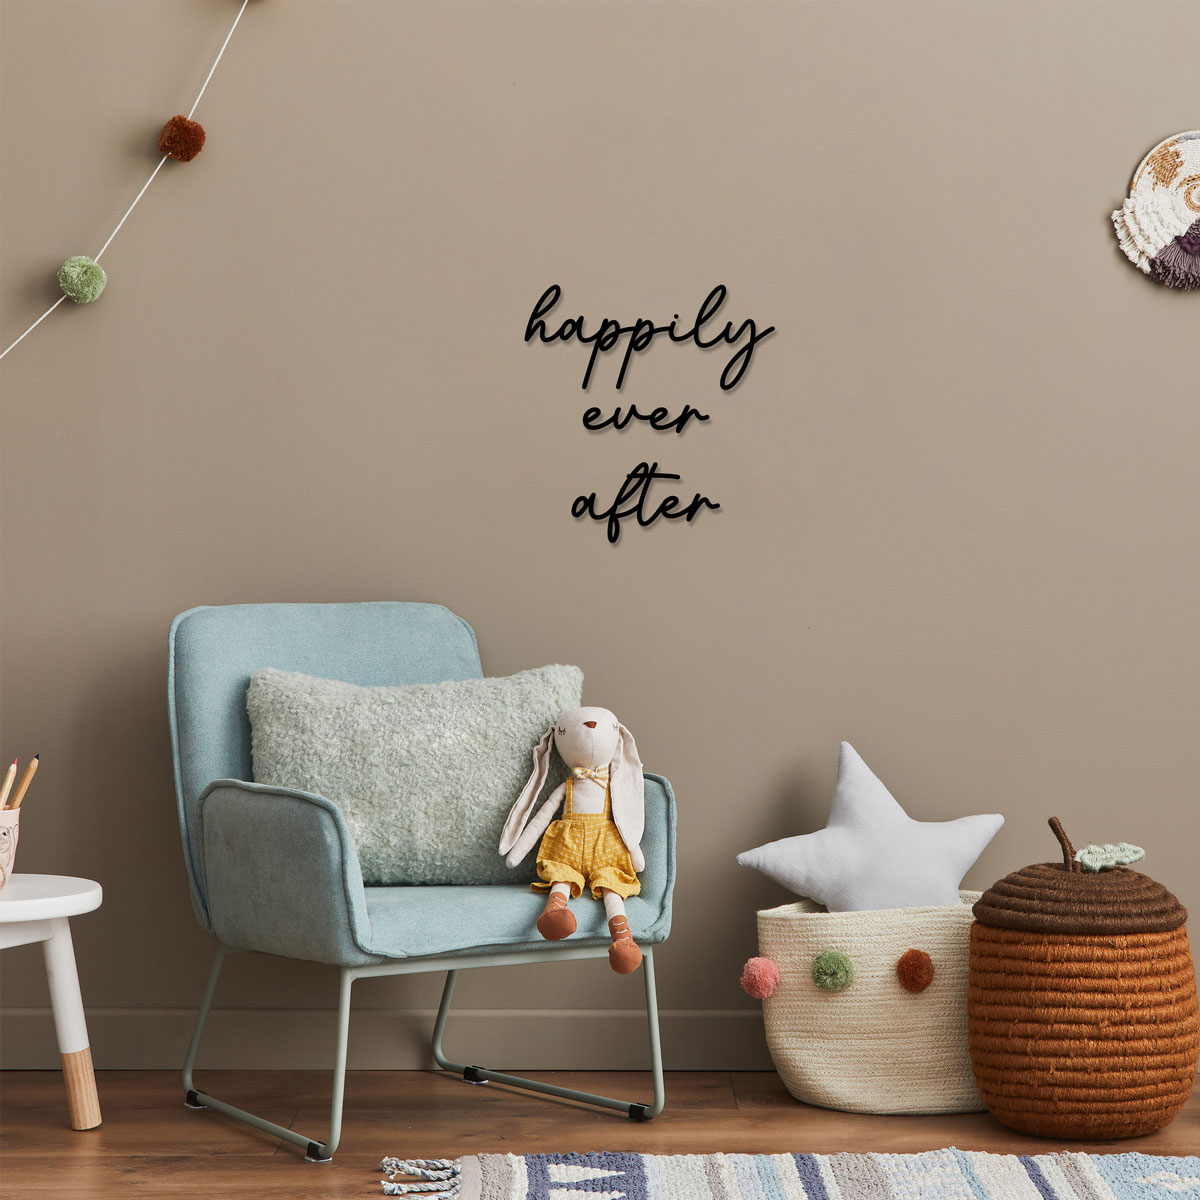 Kids Room Happily Ever After